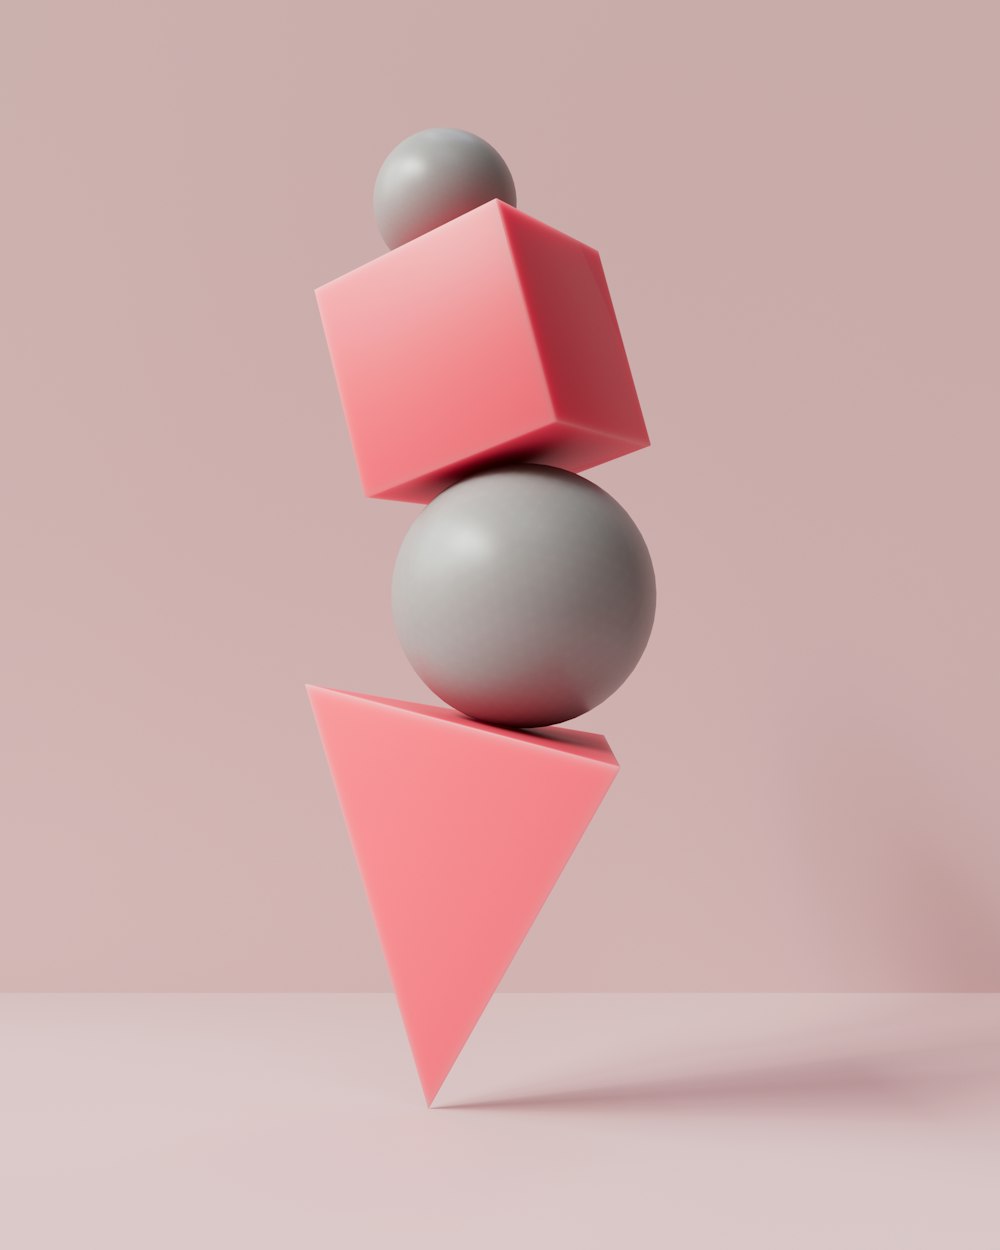 a gray and pink object with a gray ball on top of it